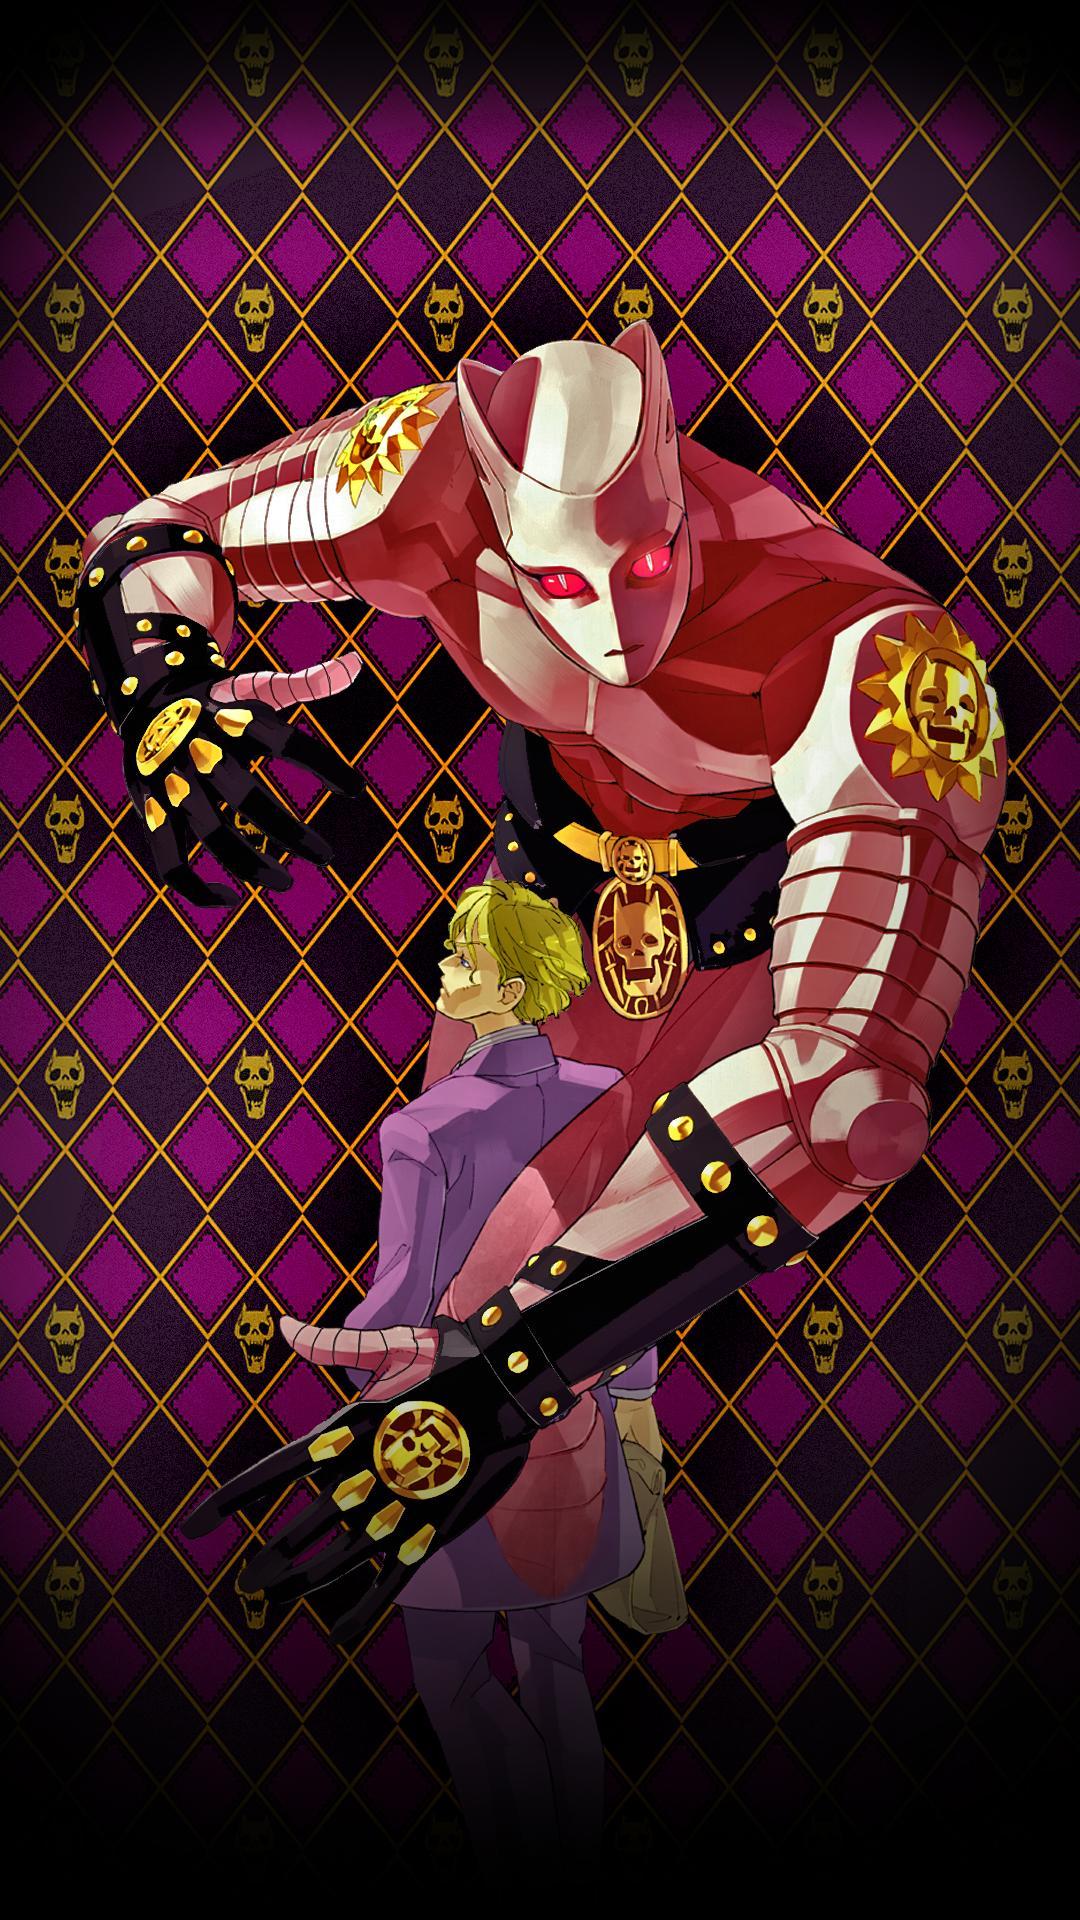 Fanart With all these Killer Queen wallpaper going around, I thought that I should share my own!